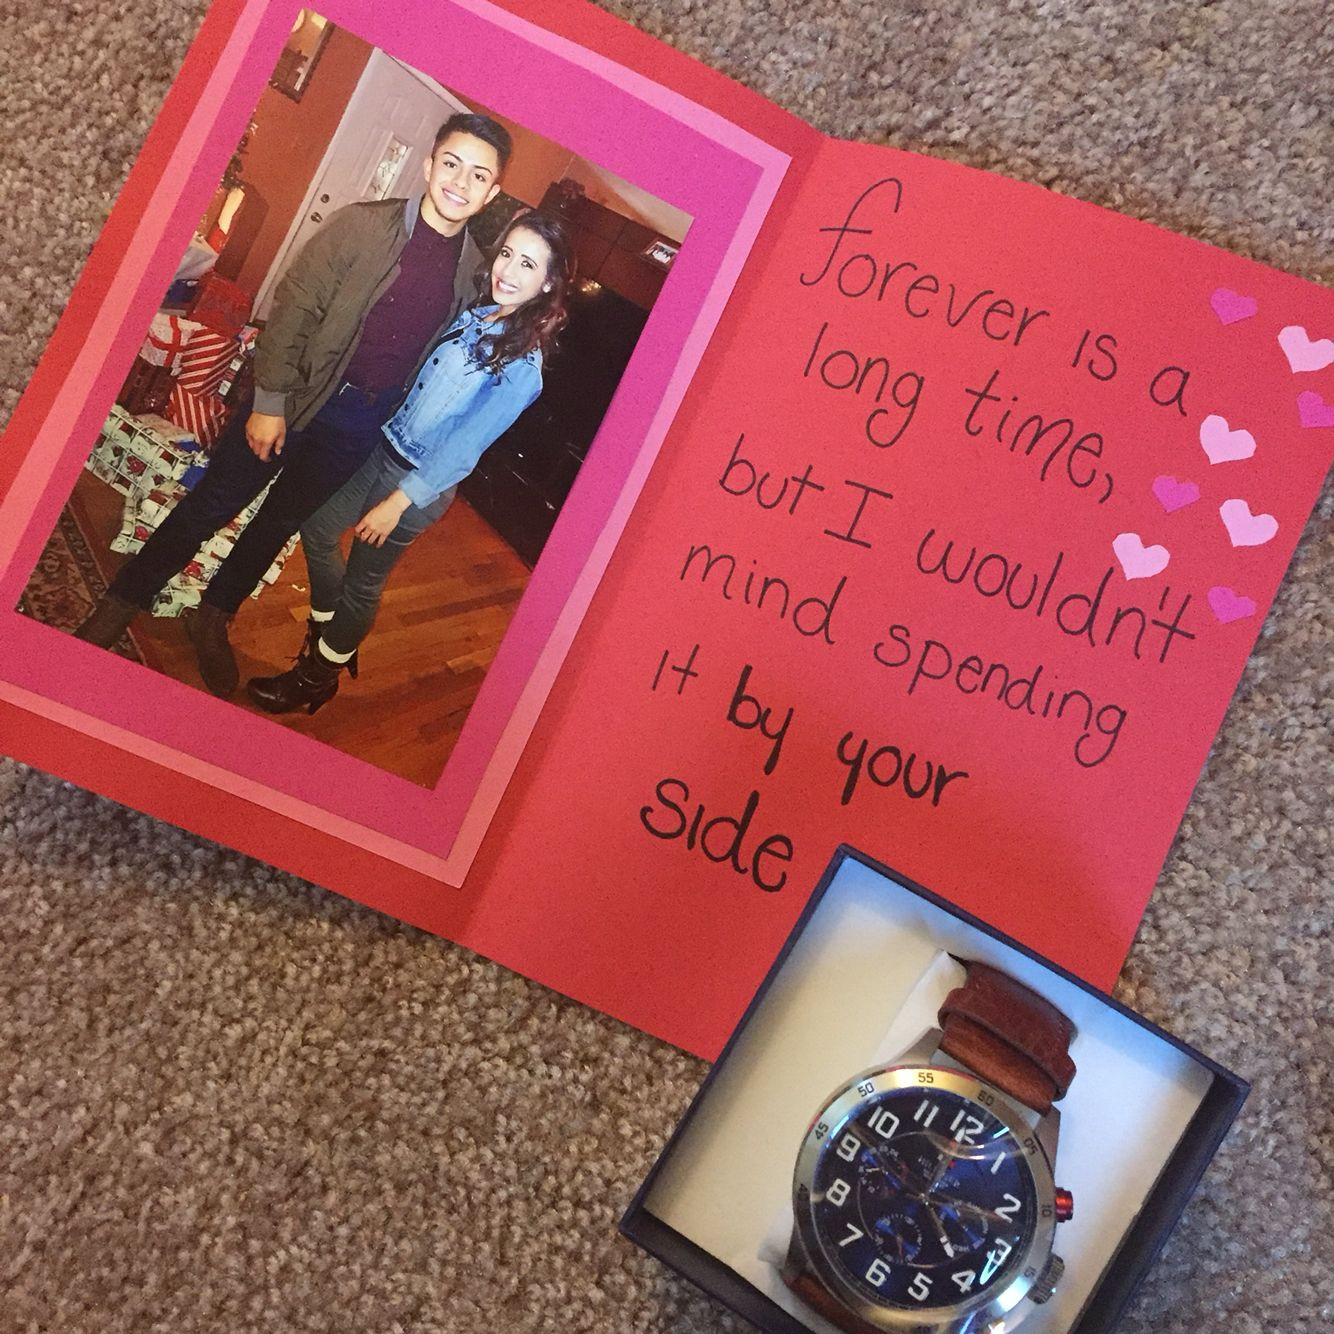 25-of-the-best-ideas-for-valentine-day-gift-ideas-for-your-boyfriend